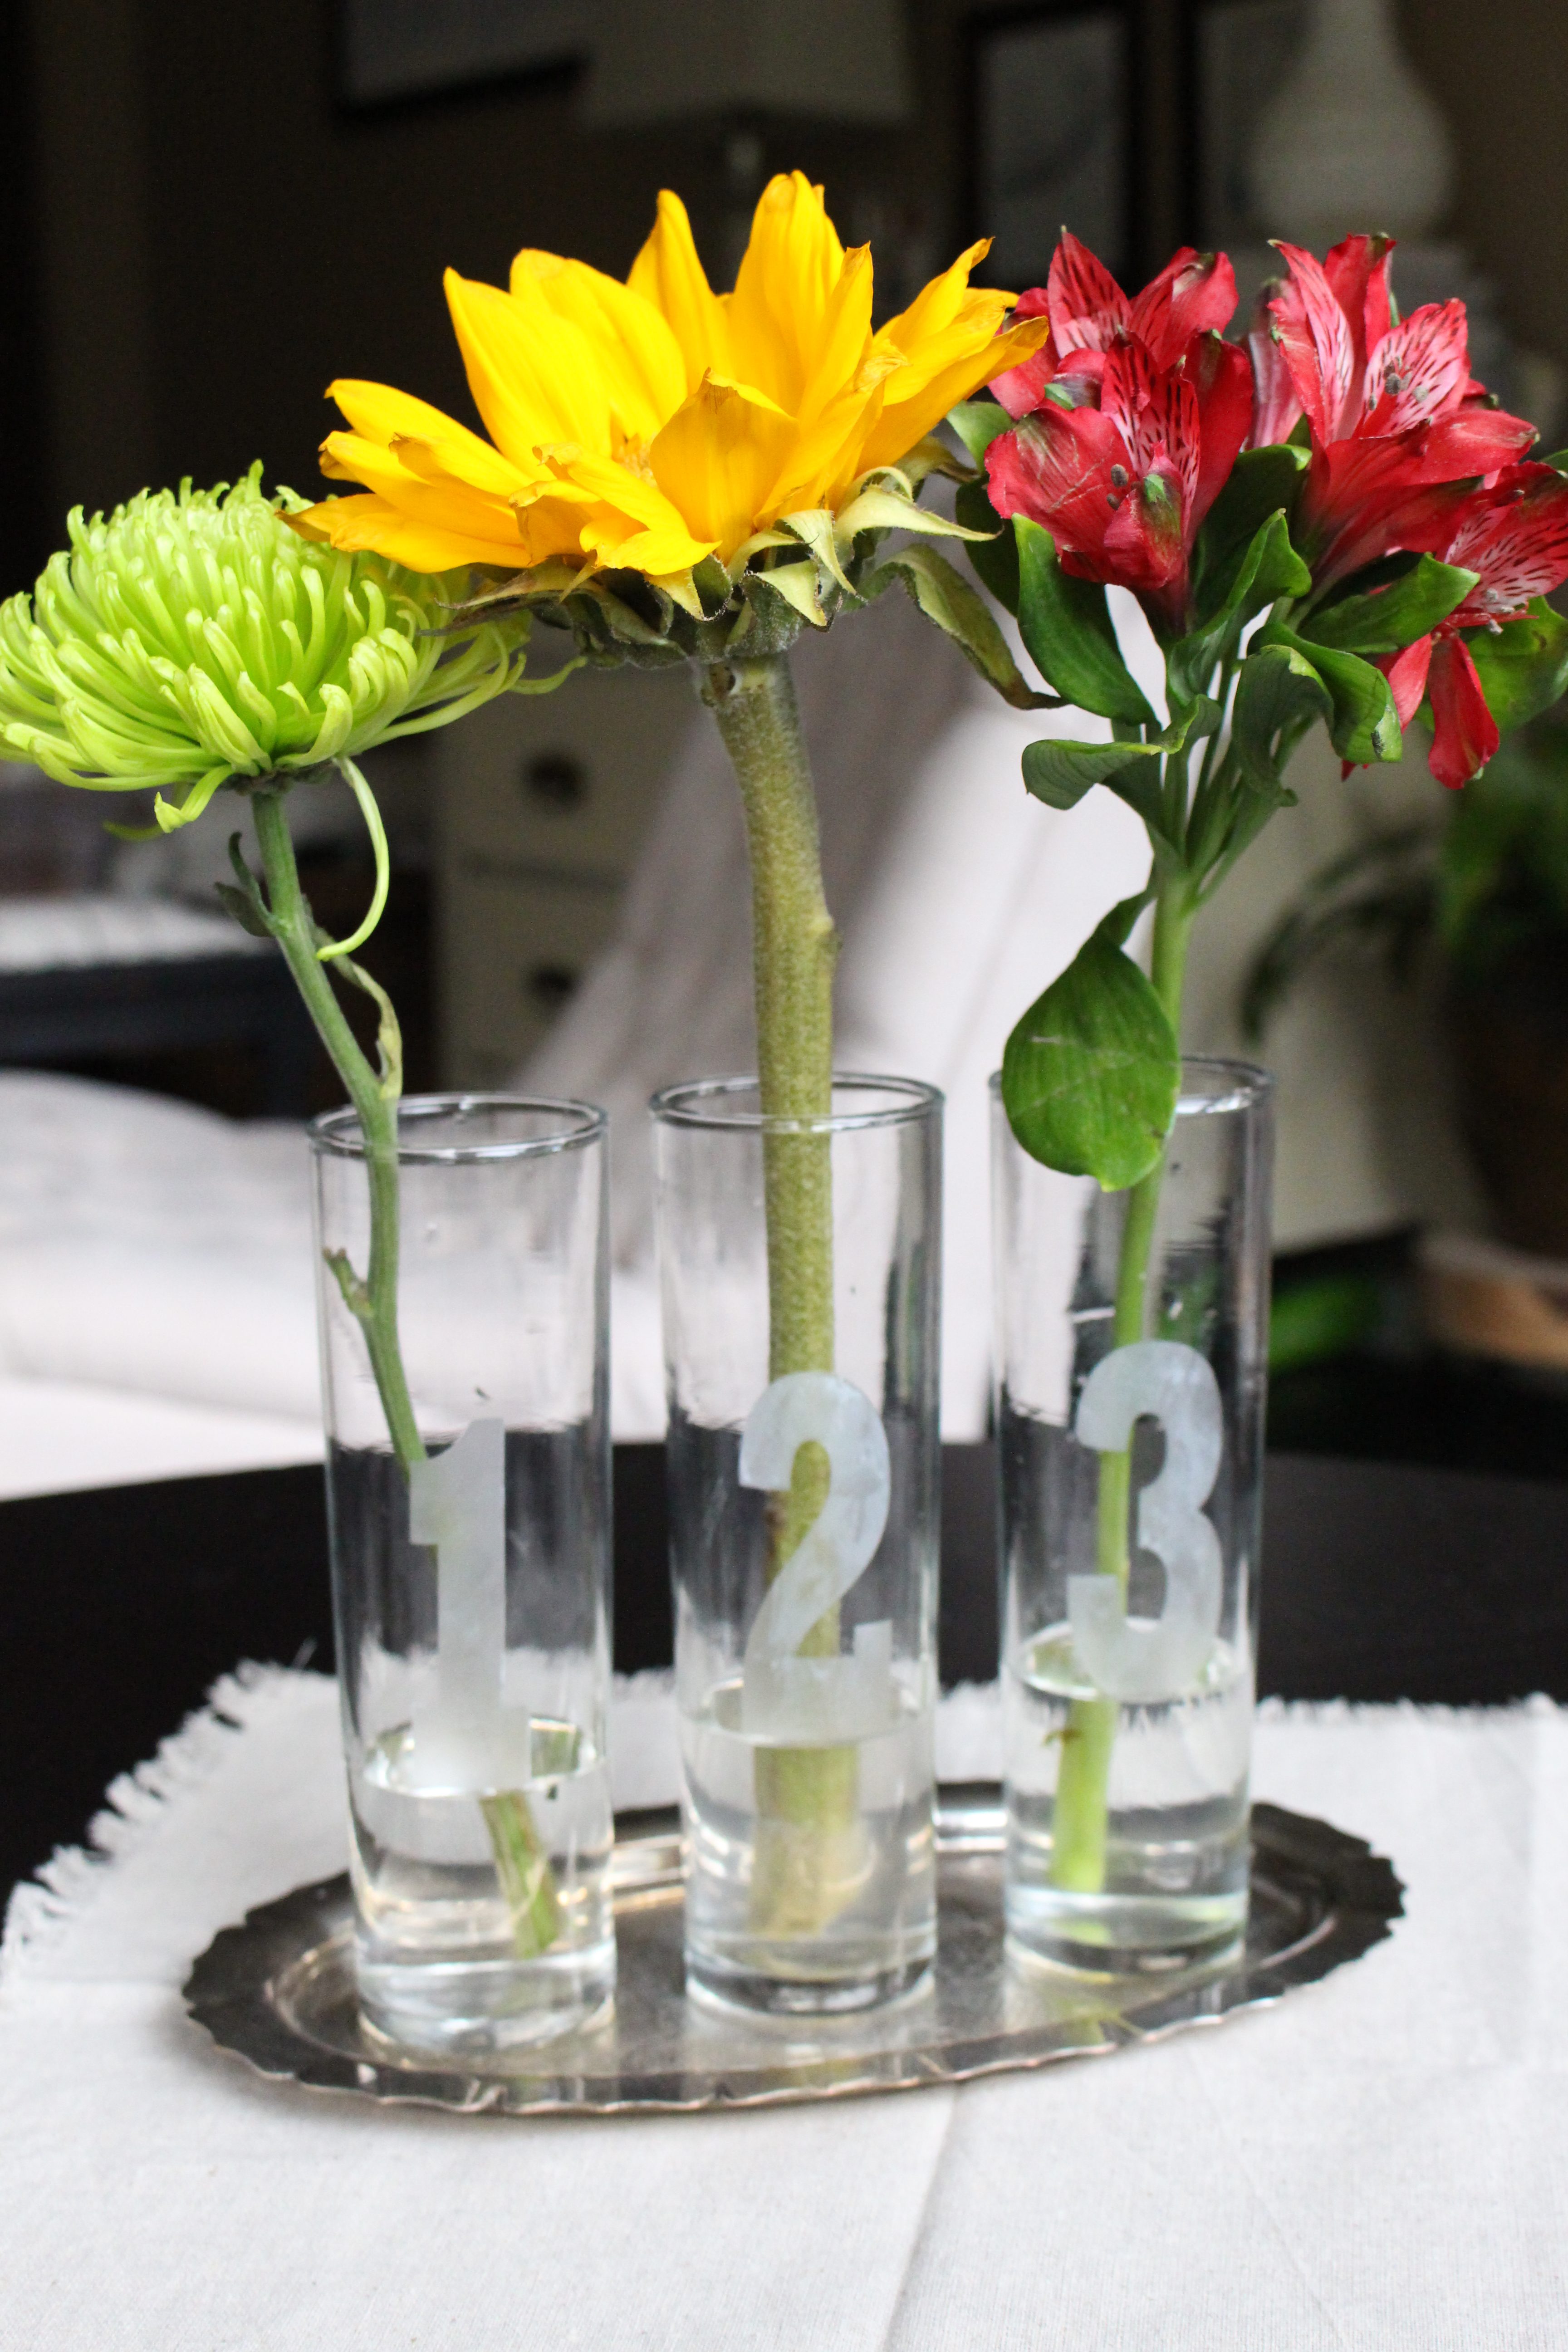 Glass Etched Bud Vases- how to etch glass- crafts- DIY- glass etching- simple glass etching with cream